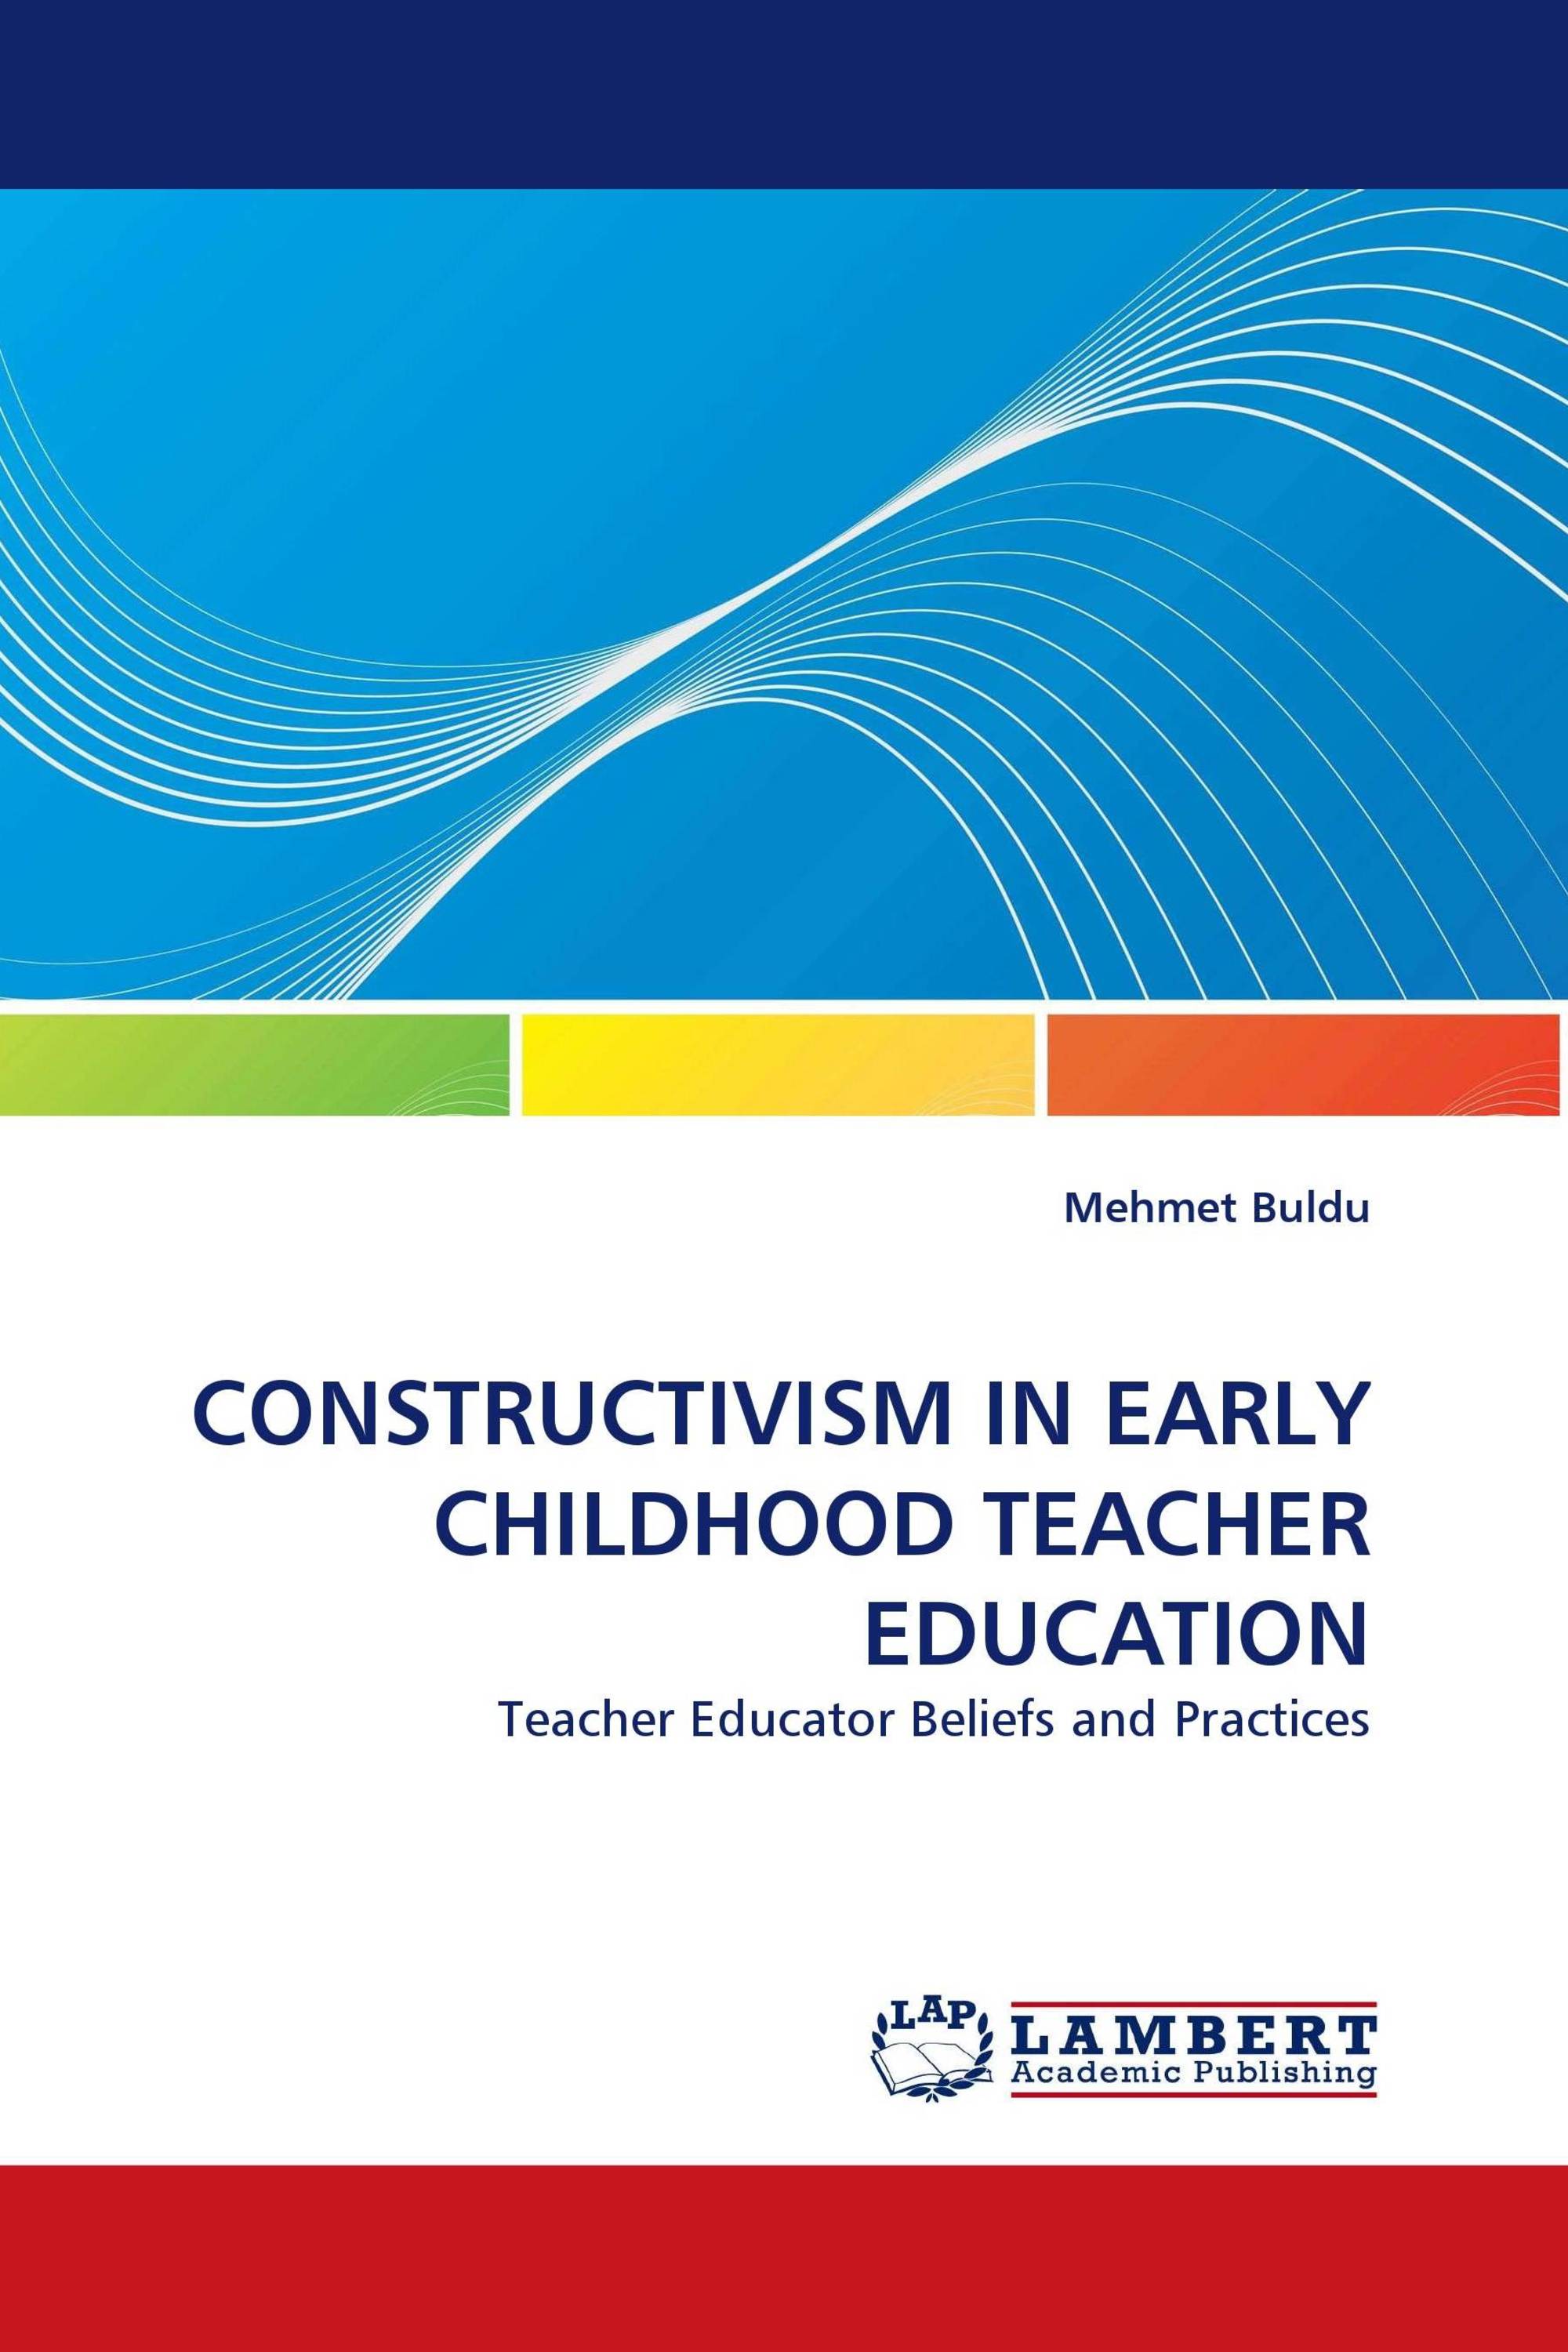 CONSTRUCTIVISM IN EARLY CHILDHOOD TEACHER EDUCATION